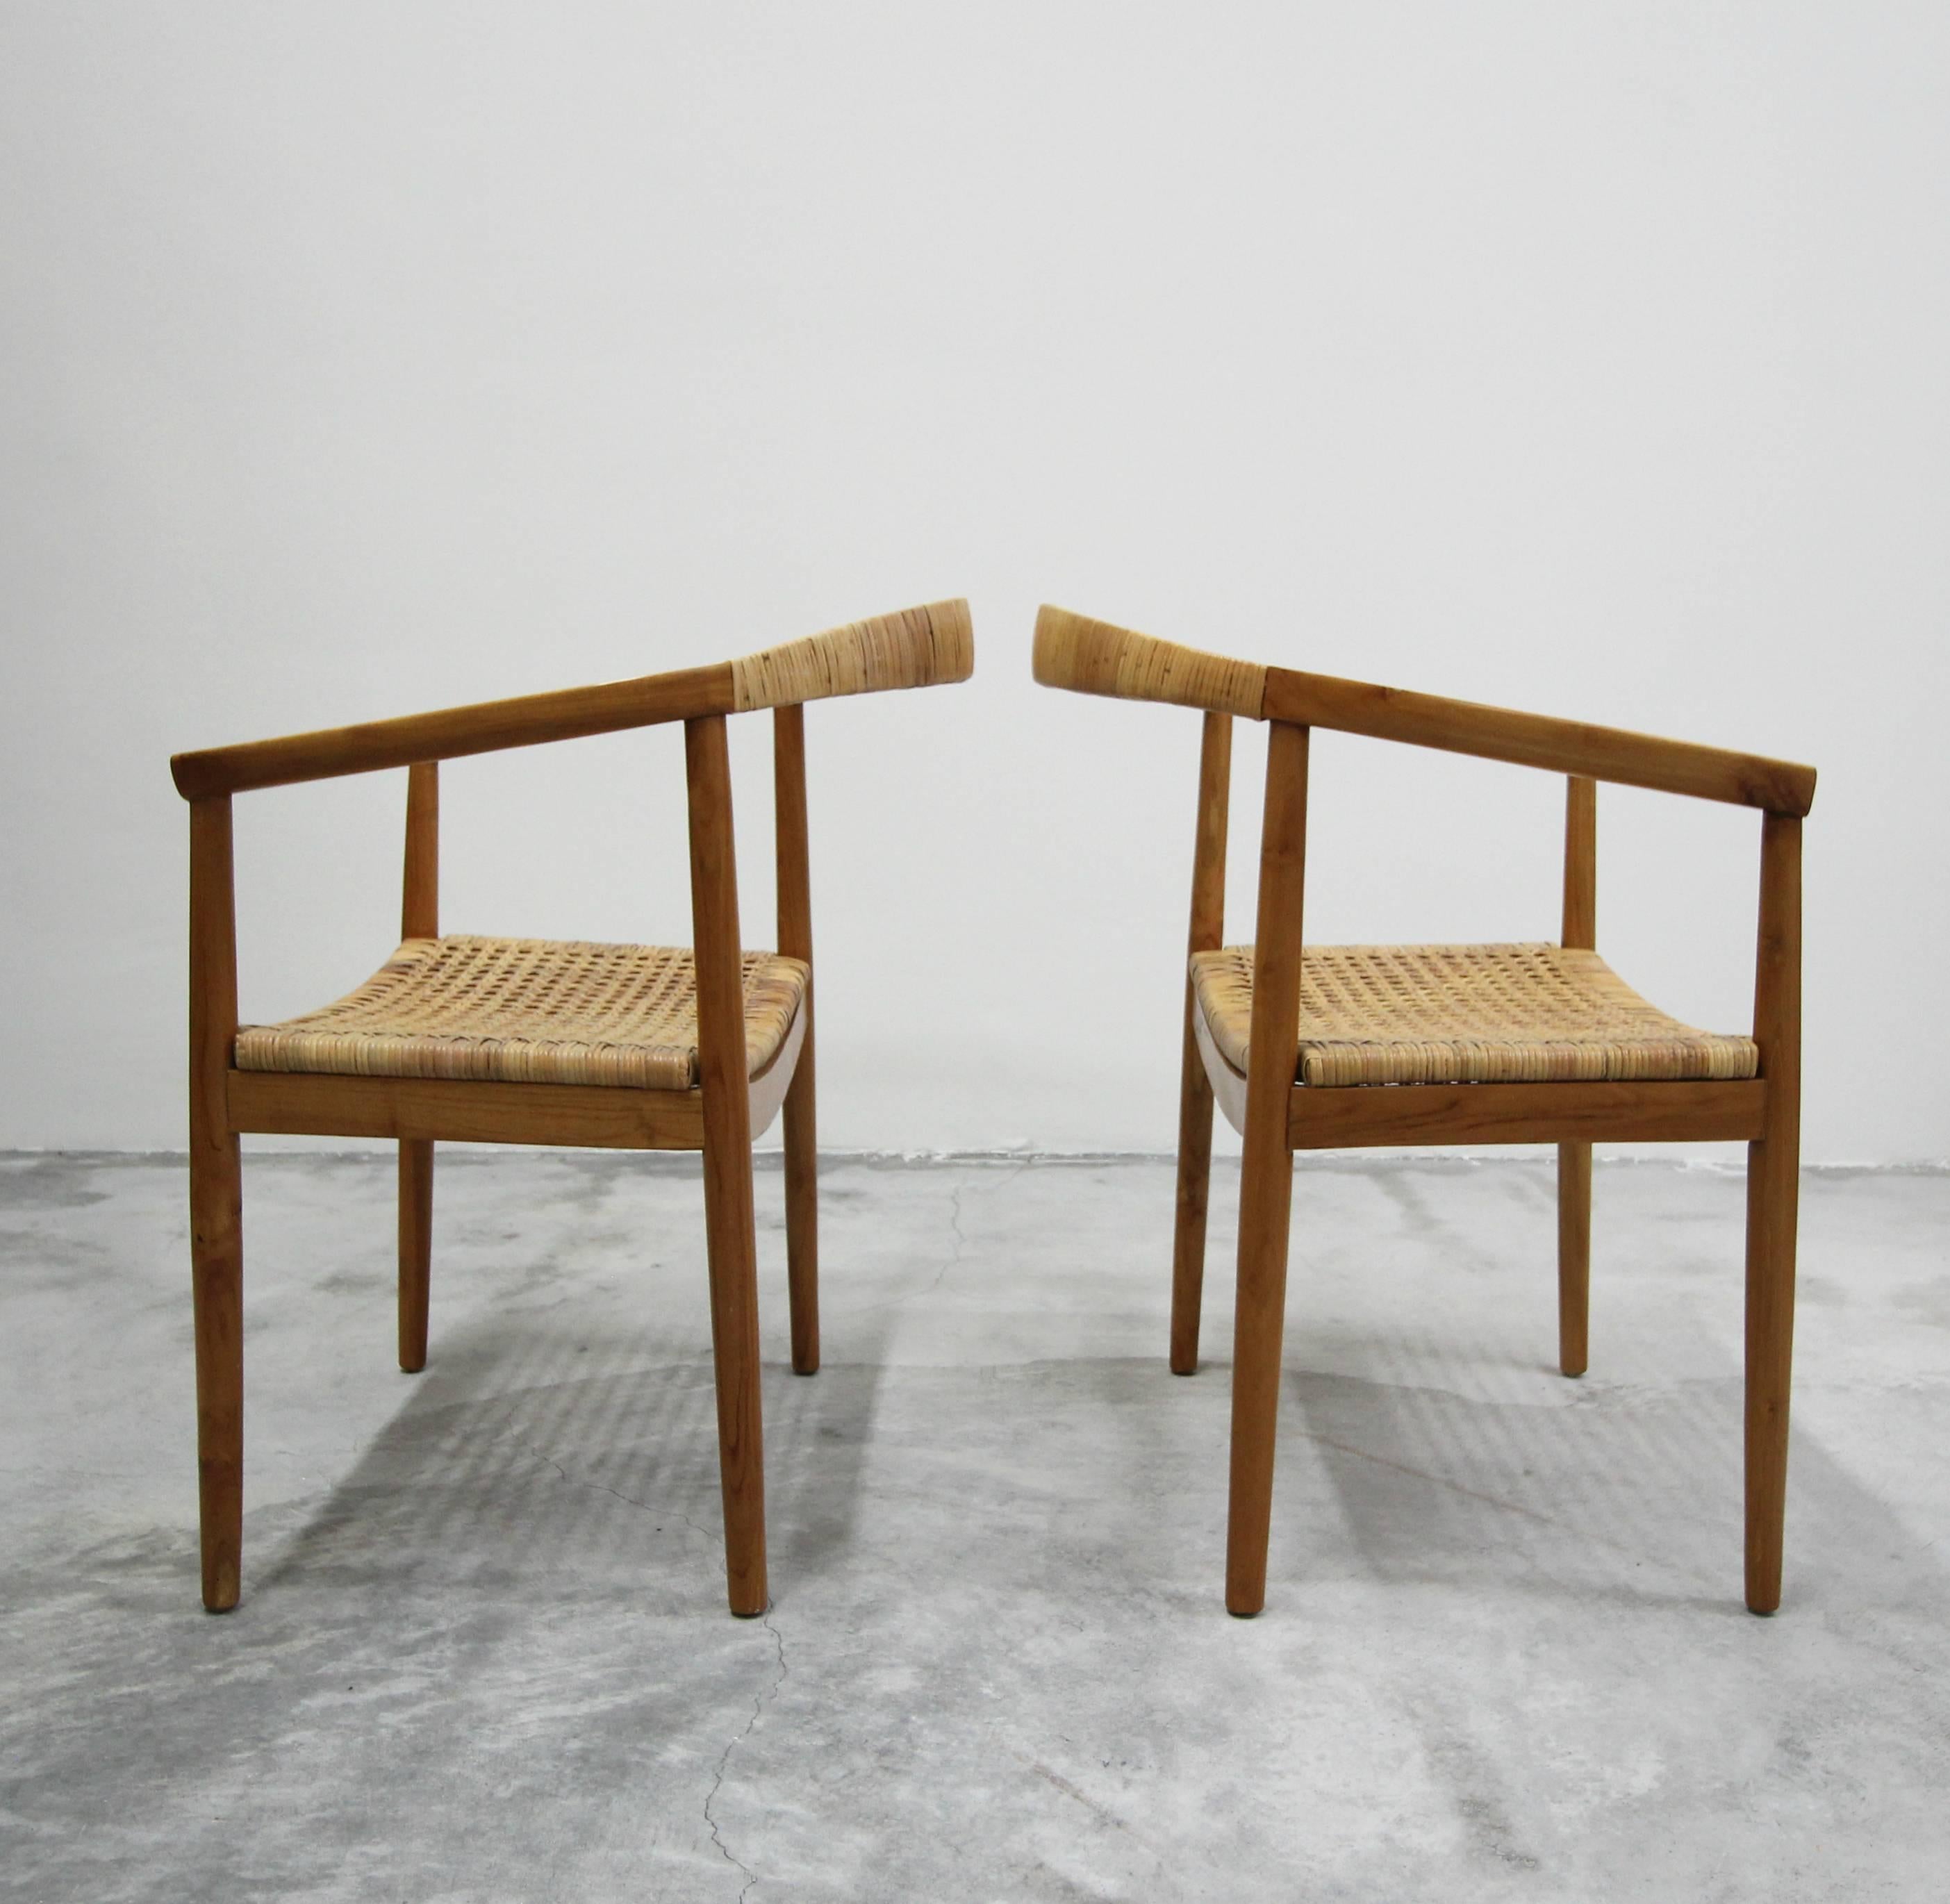 20th Century Vintage Pair of Oversized Danish Style Teak and Cane Round Back Side Chairs